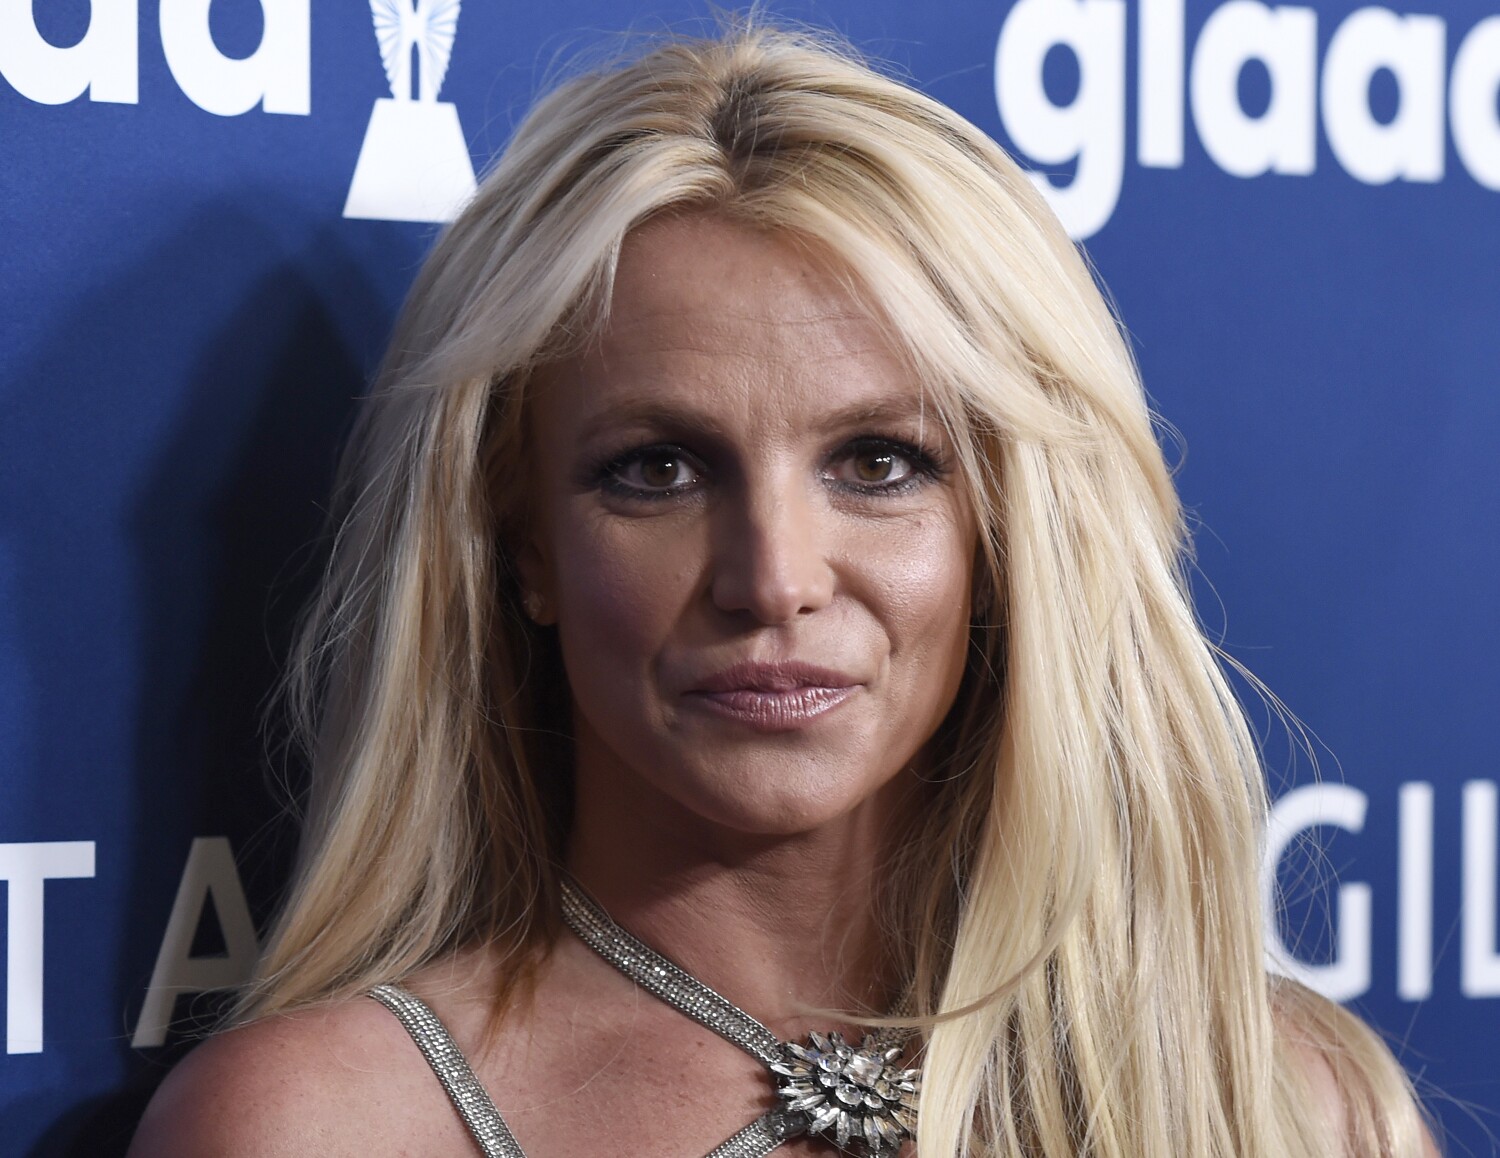 Britney Spears announces miscarriage - Los Angeles Times